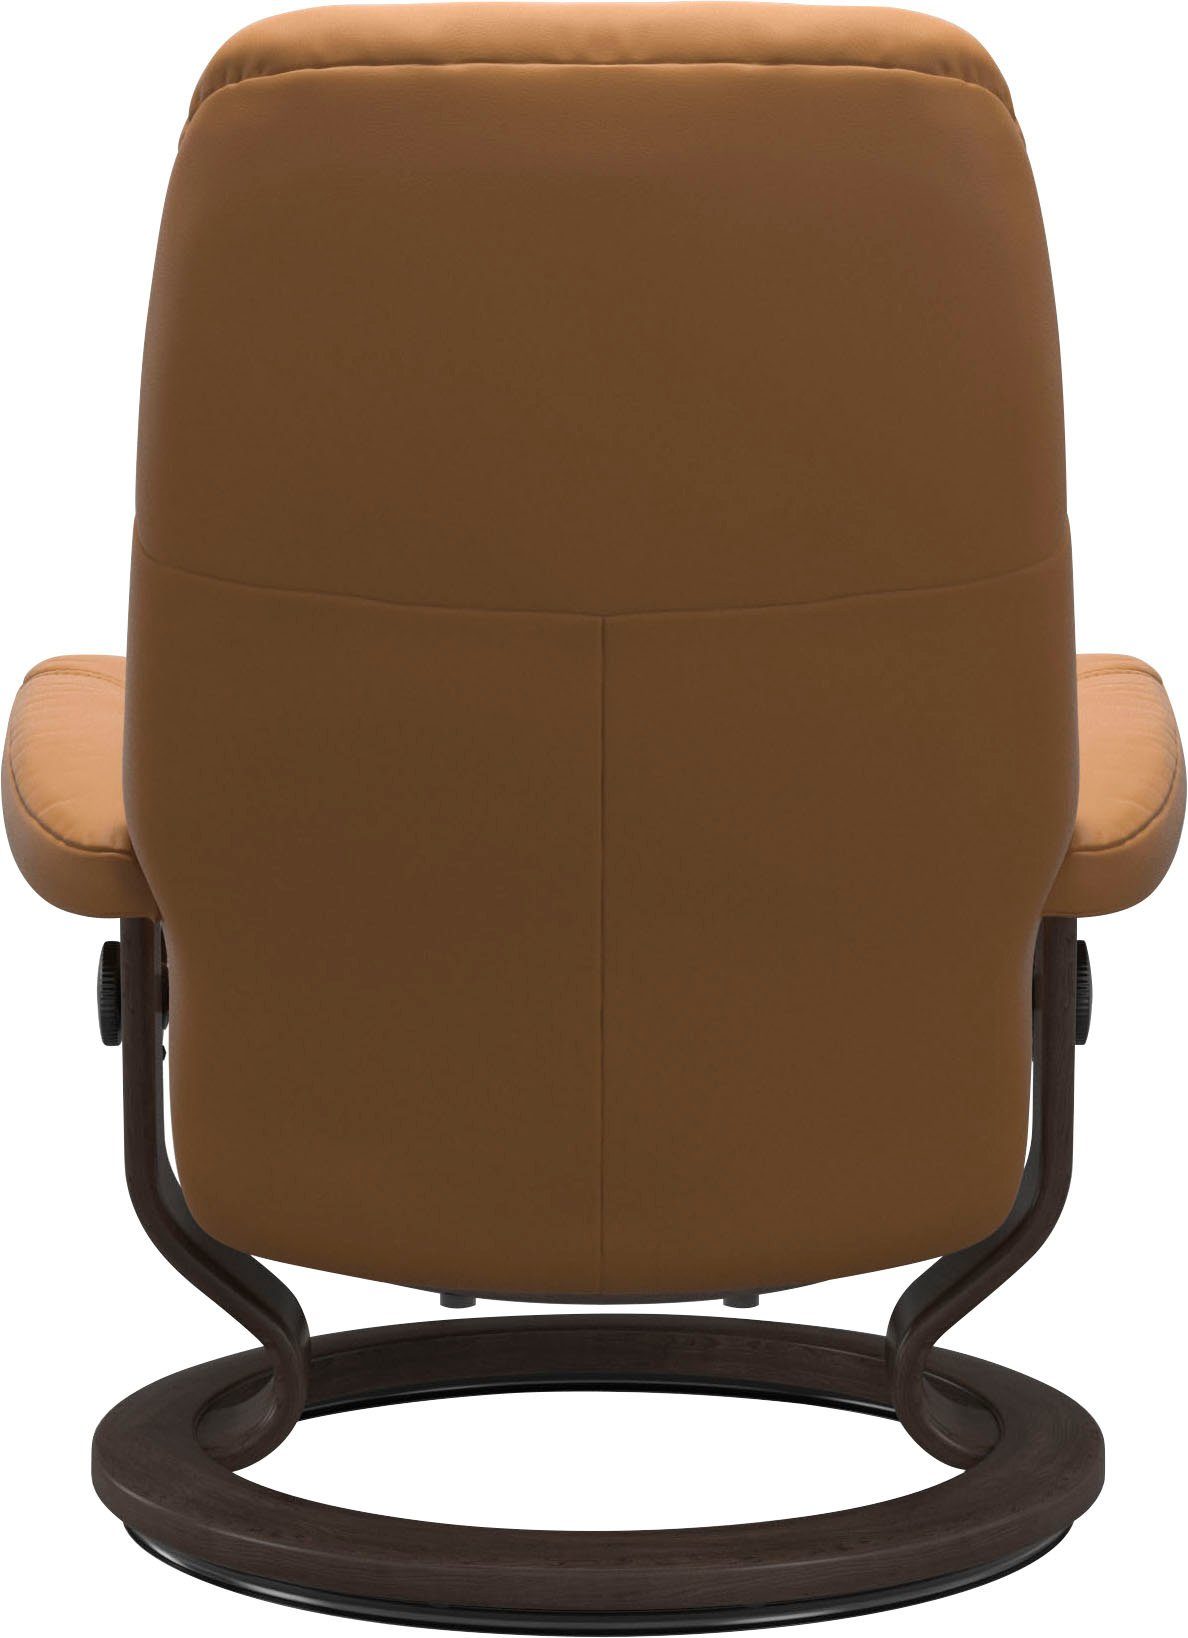 Consul, Relaxsessel Base, Classic Wenge Größe Stressless® Gestell S, mit